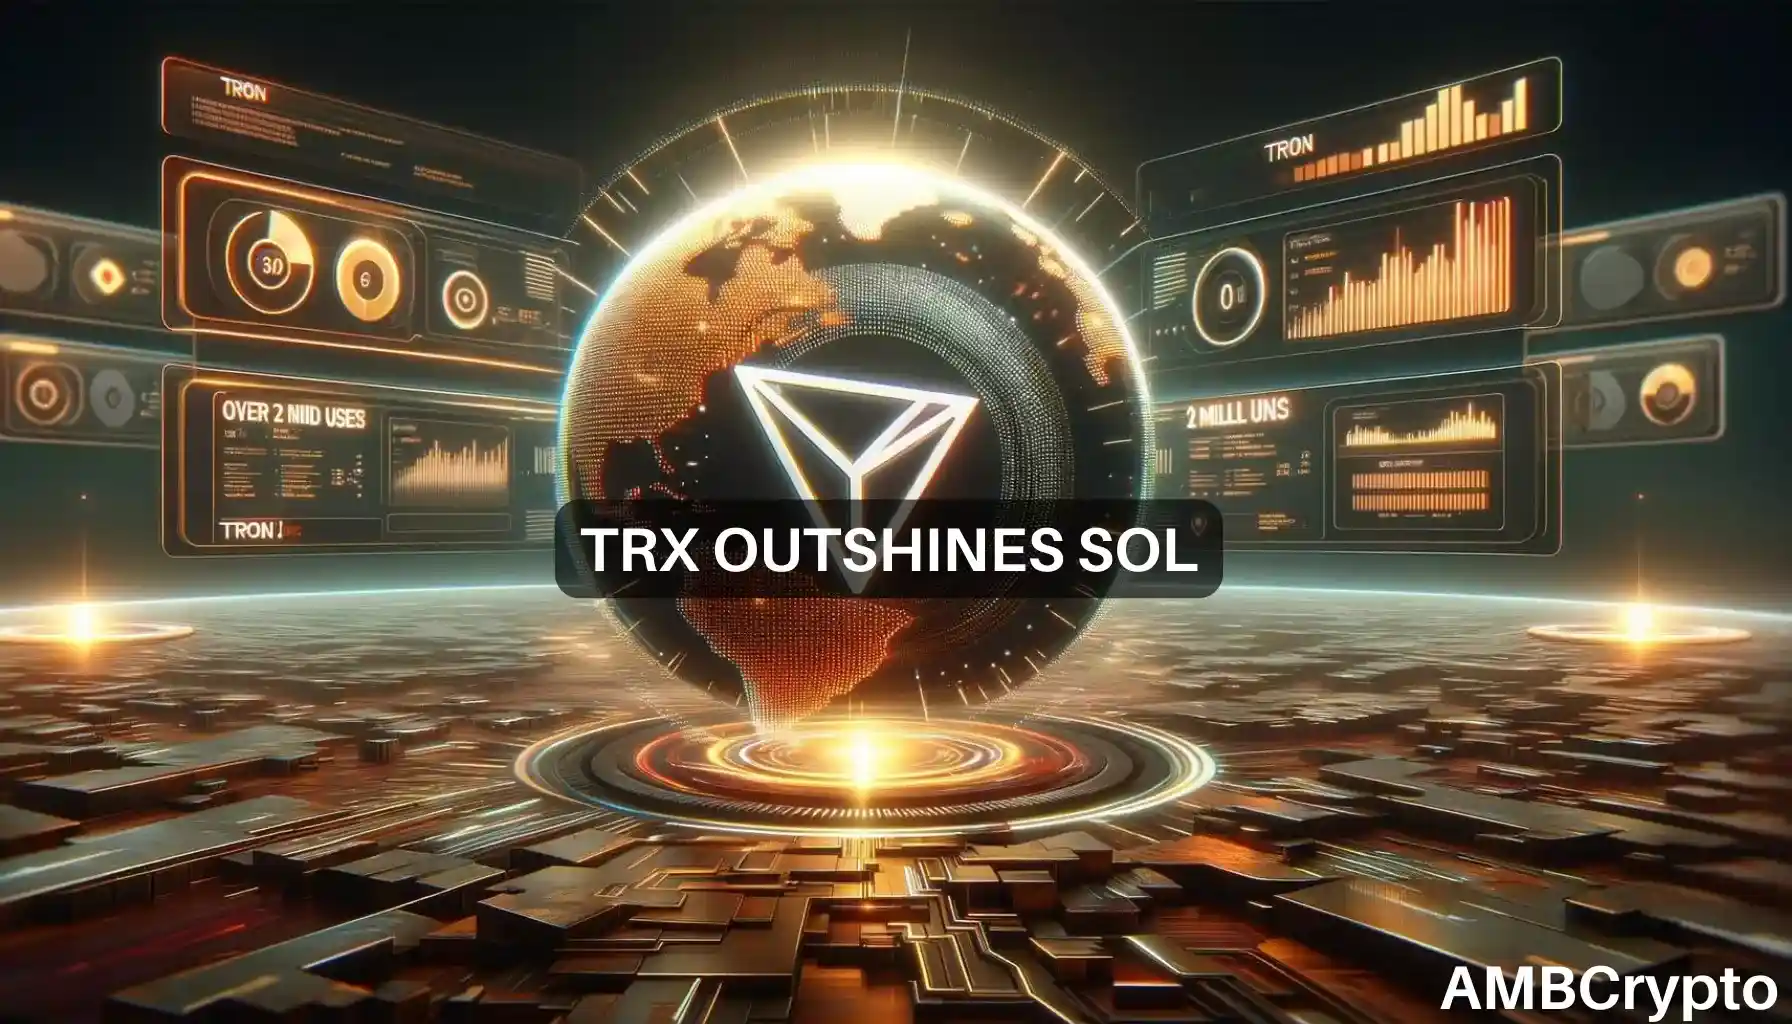 Tron vs Solana: How TRX's 2M daily user stack up against SOL